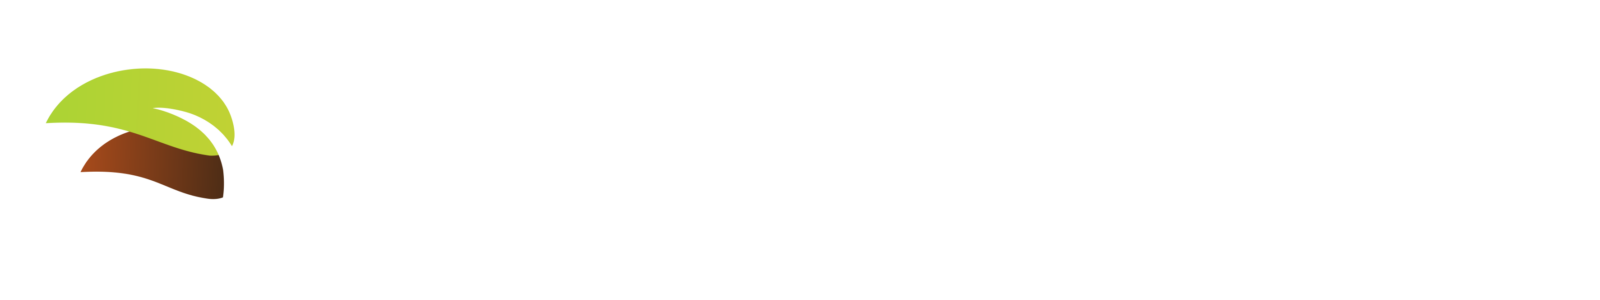 White Logo - Transitions Counseling and Consulting